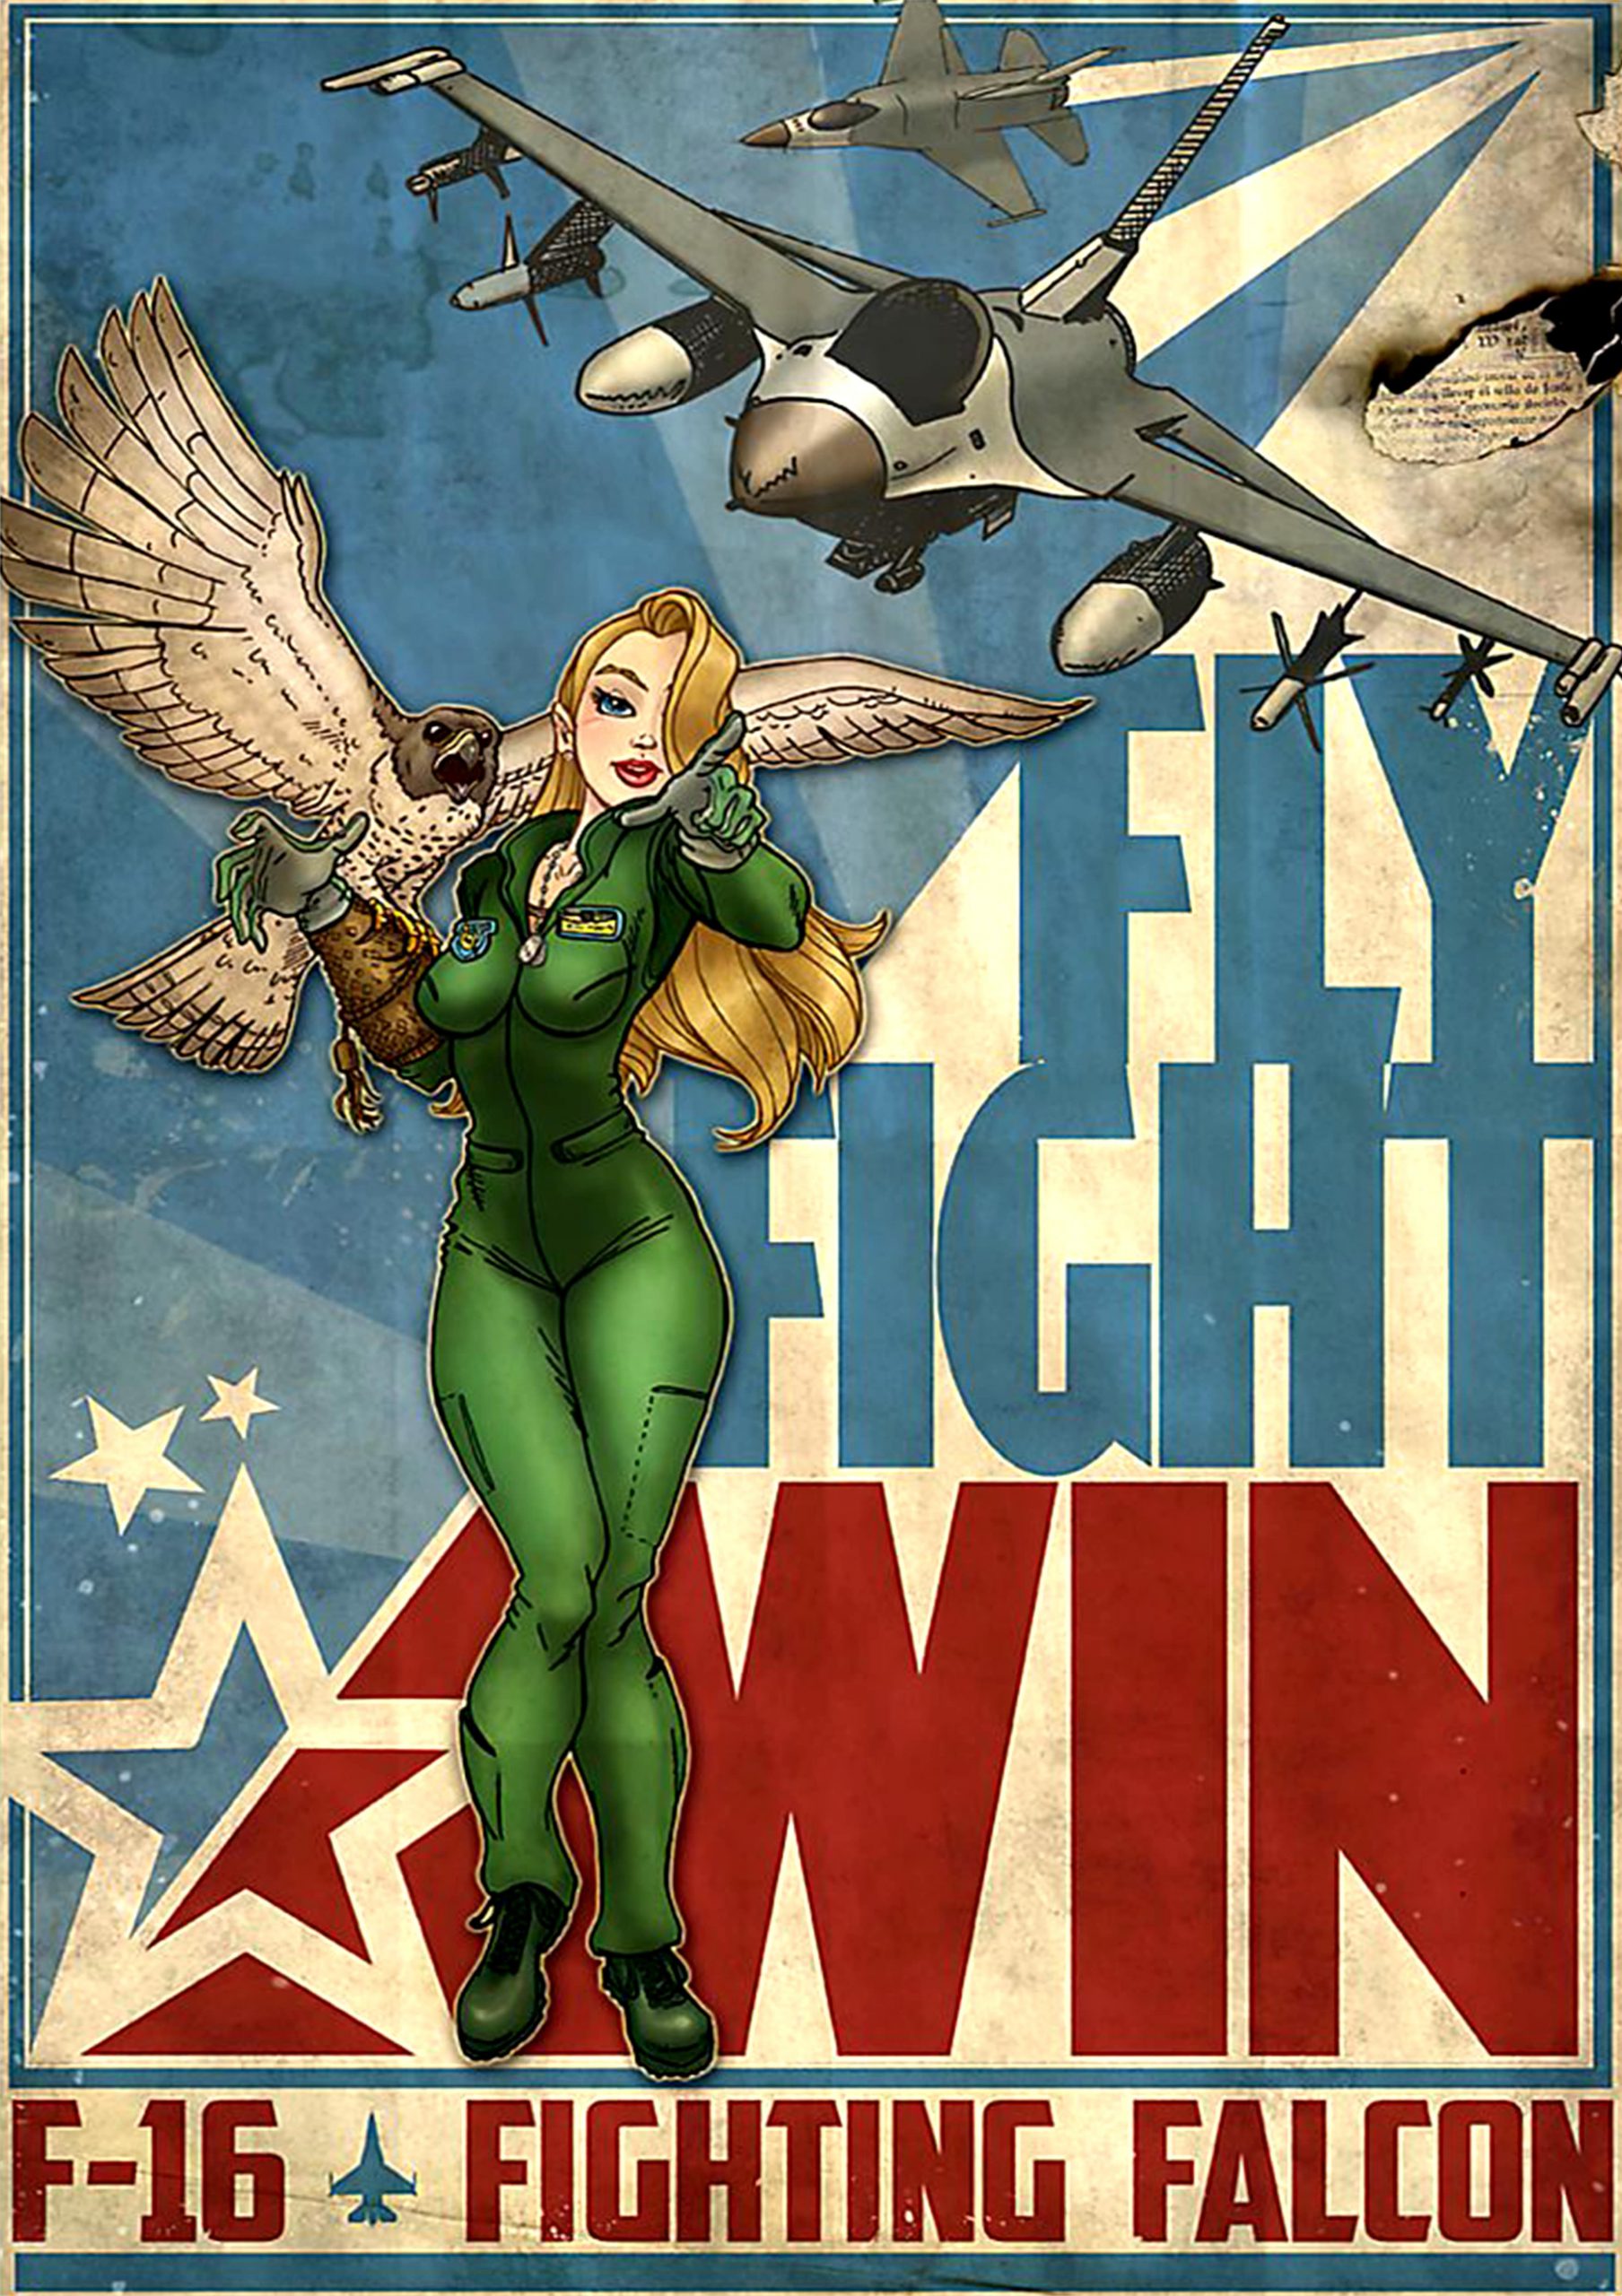 vintage fly fight win f-16 fighting falcon poster 1 - Copy (3)